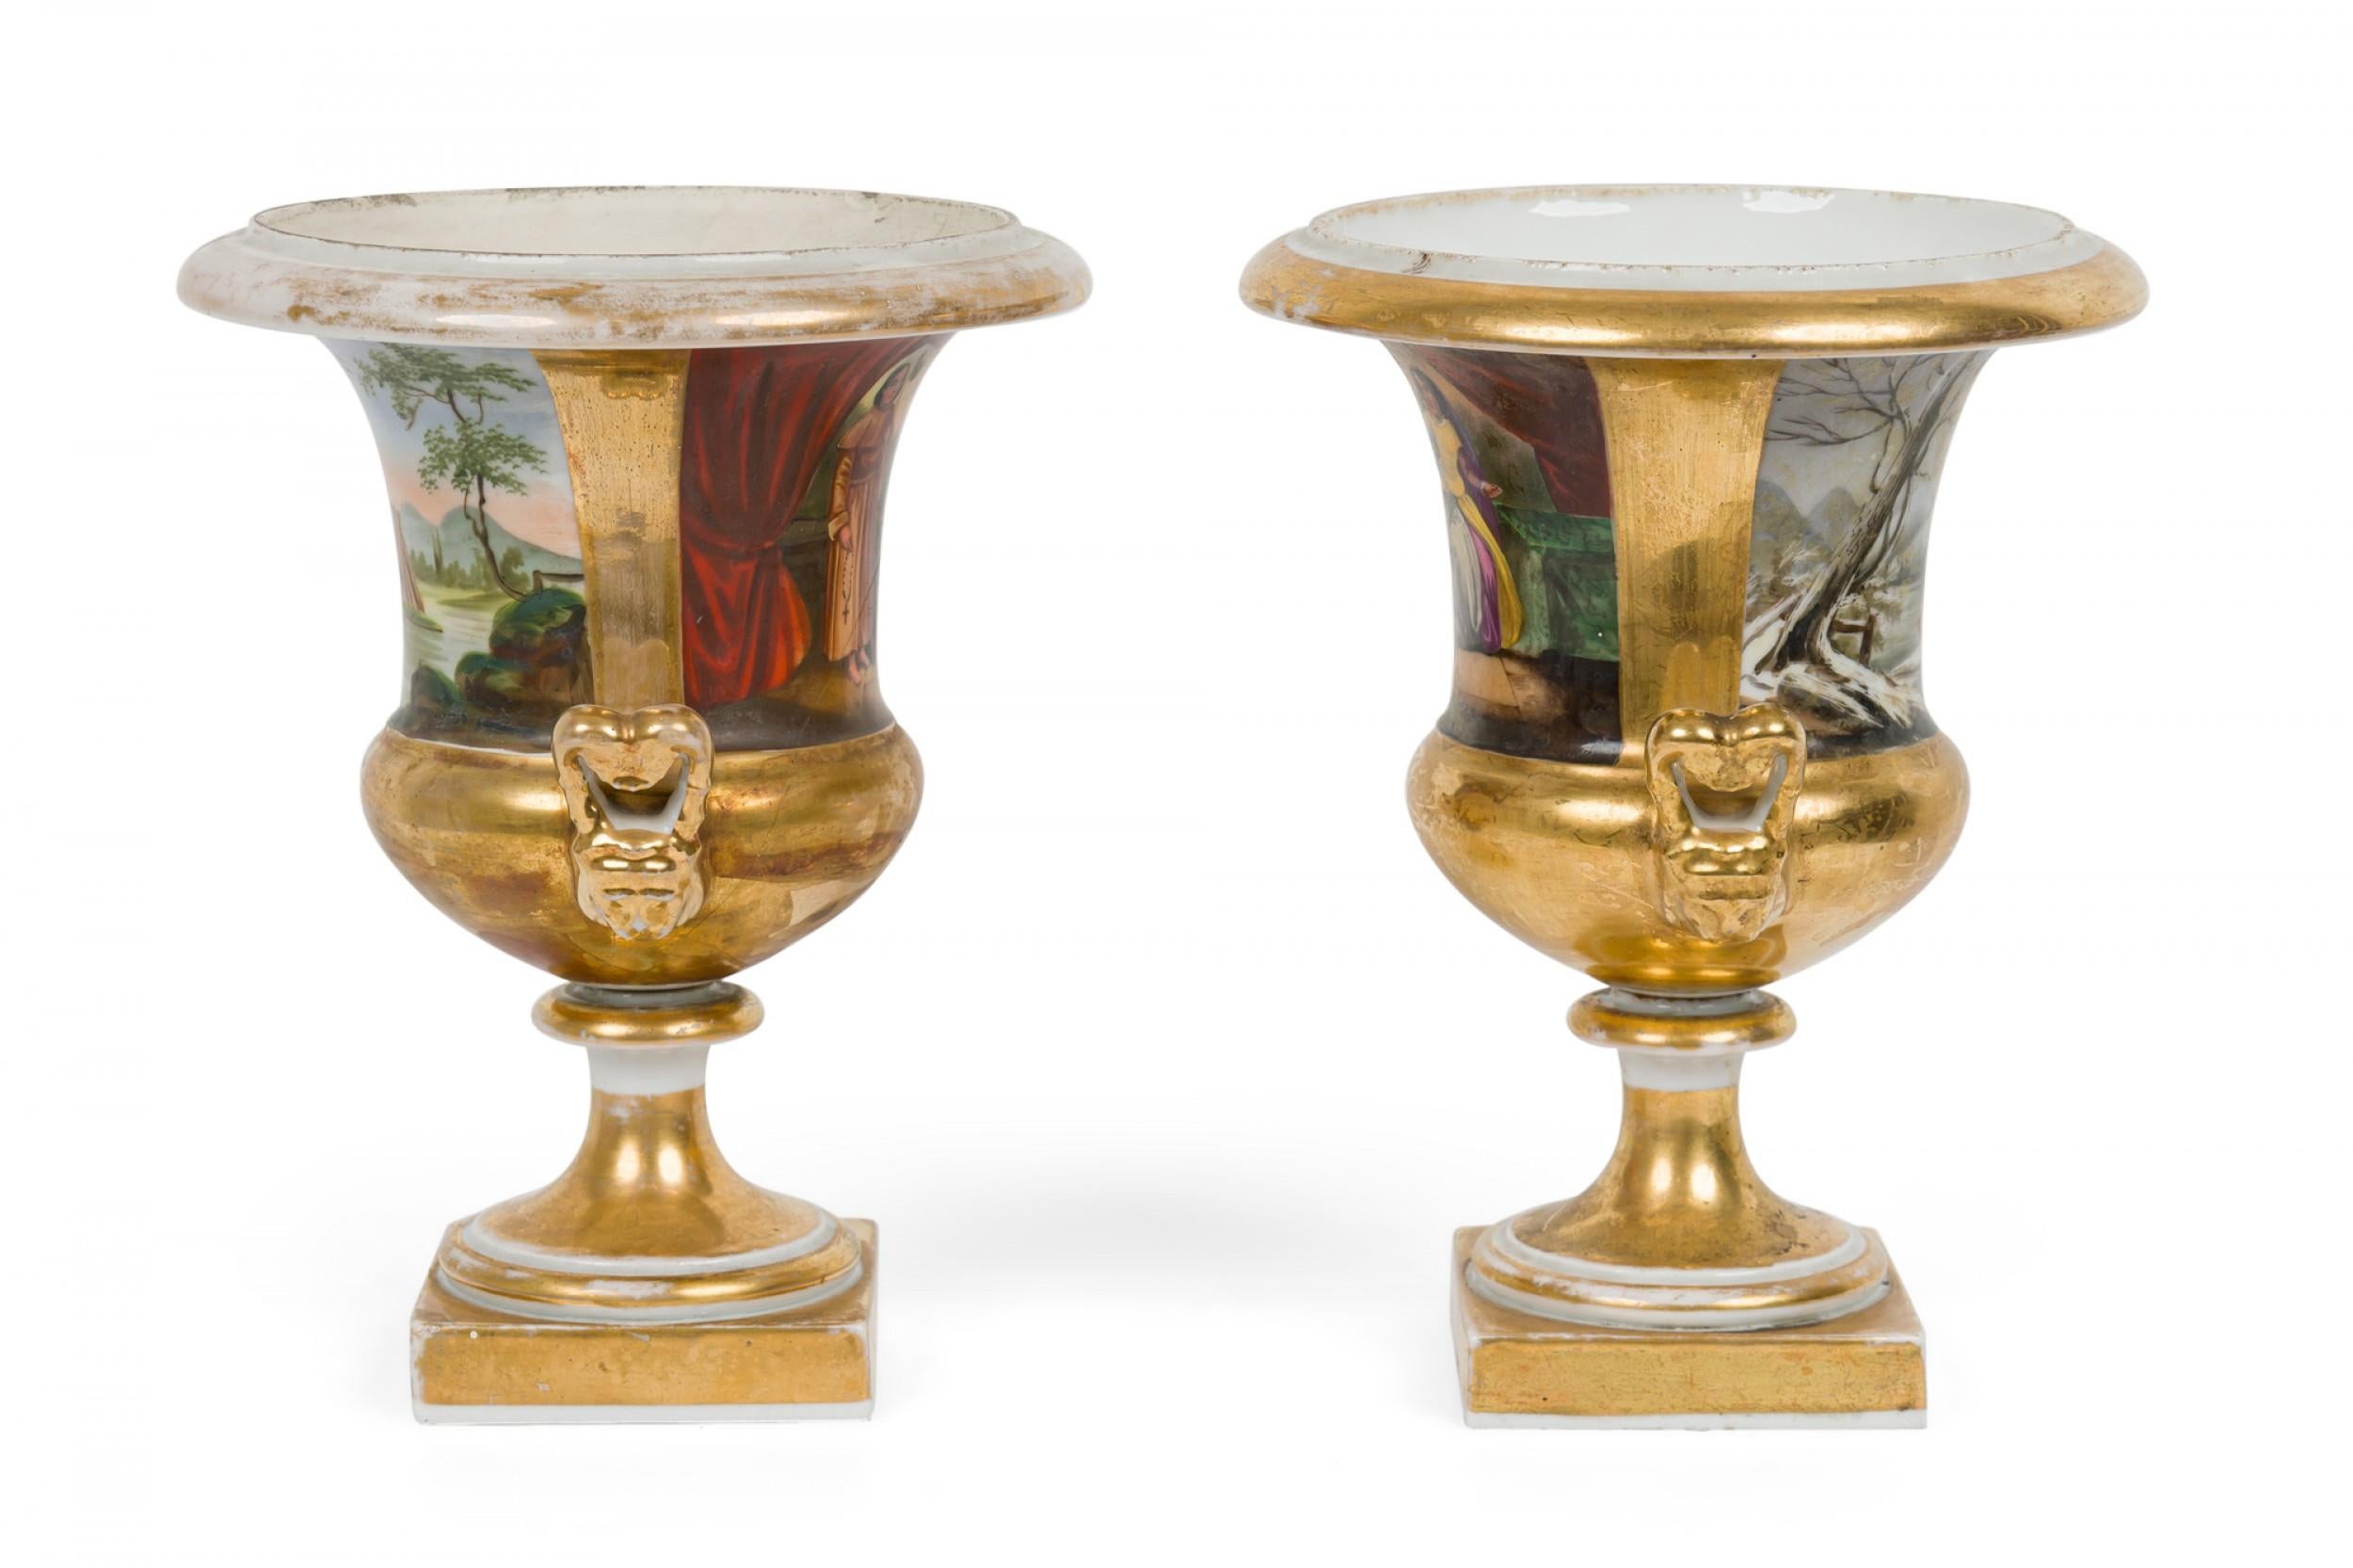 Pair of French Victorian Sevre Compagna Gilt and Painted Porcelain Urns In Good Condition For Sale In New York, NY